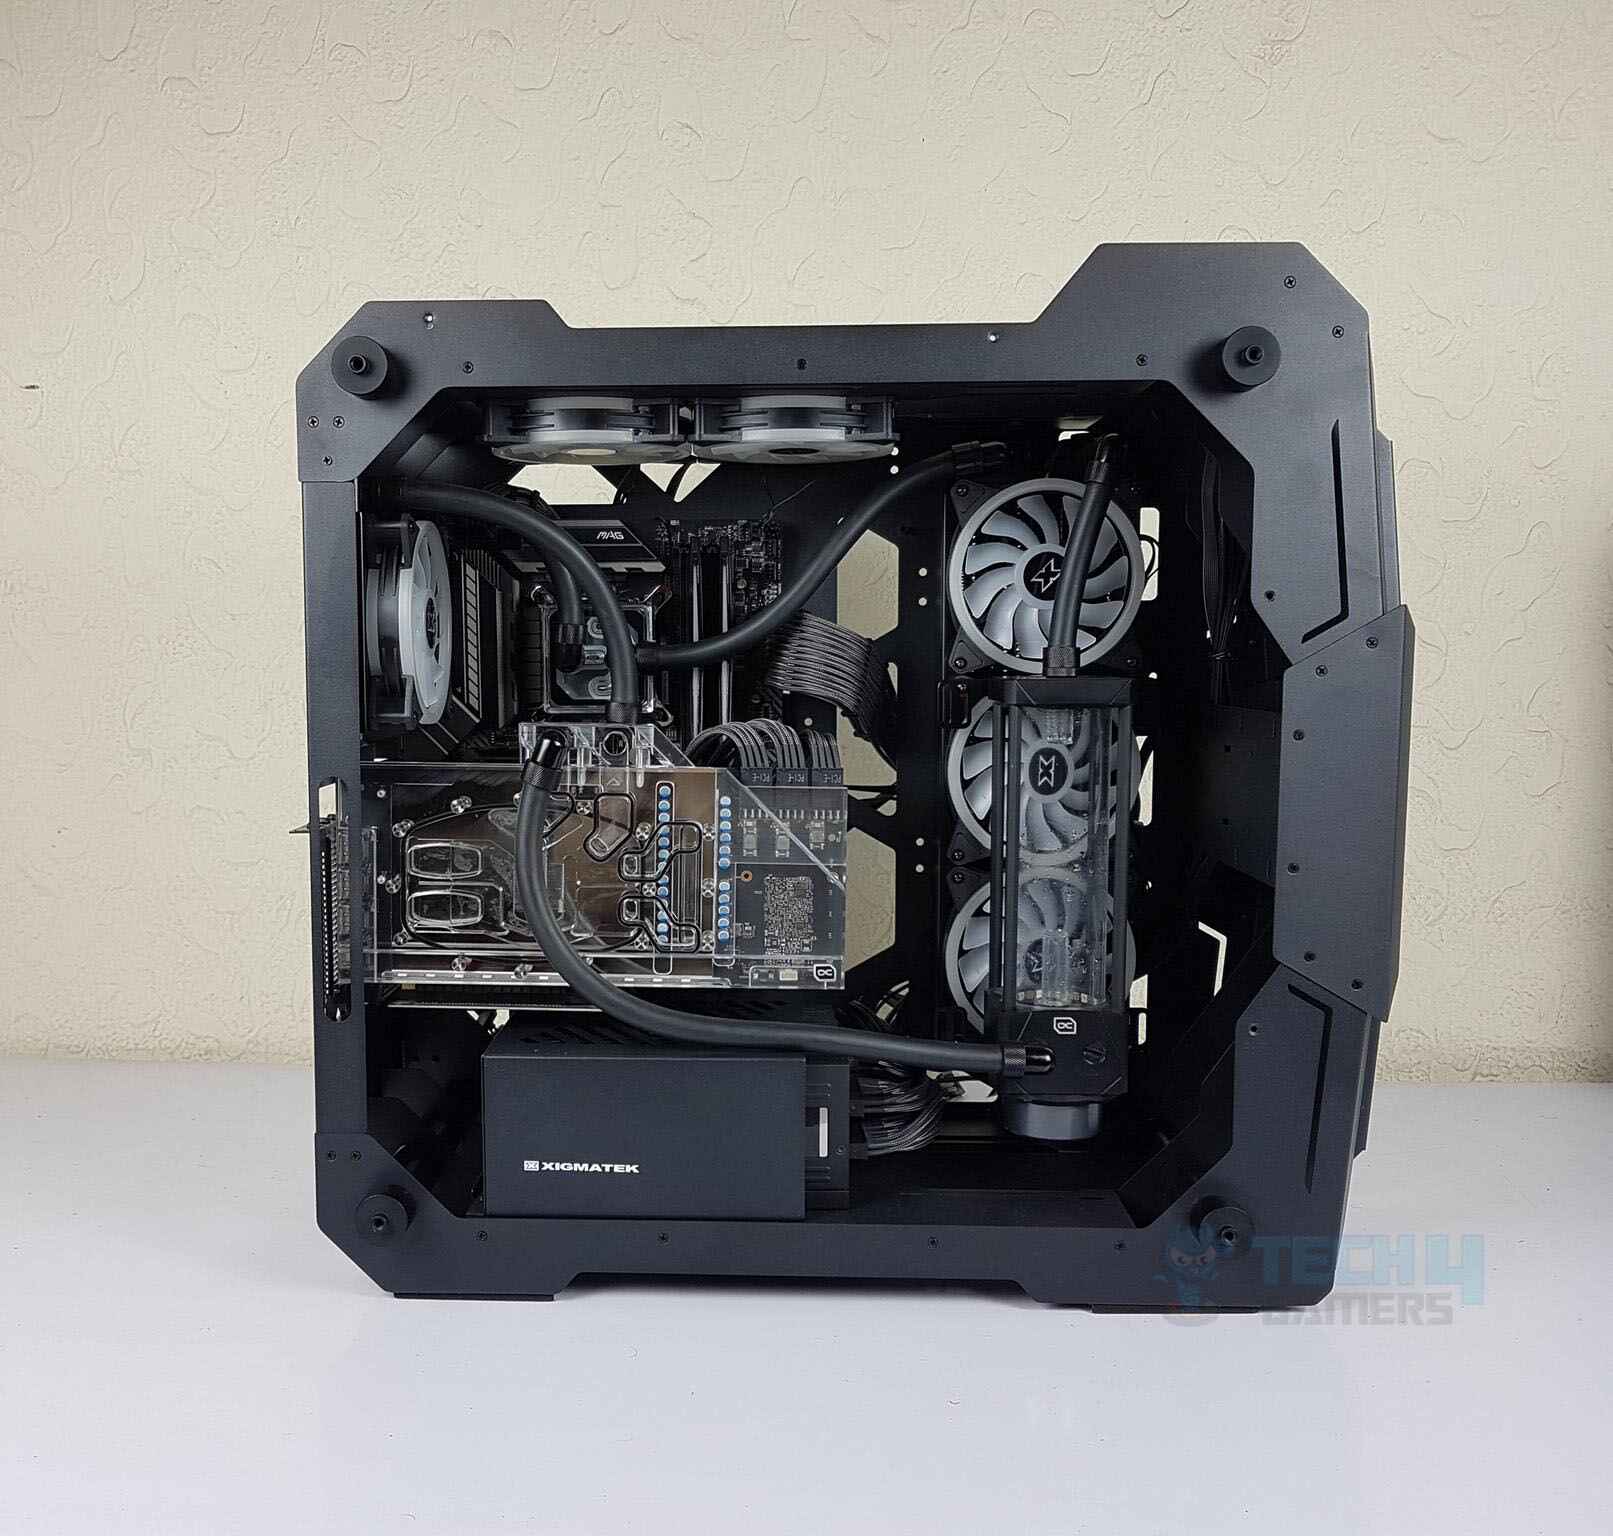 How To Tell If A PC Case Fan Is Failing